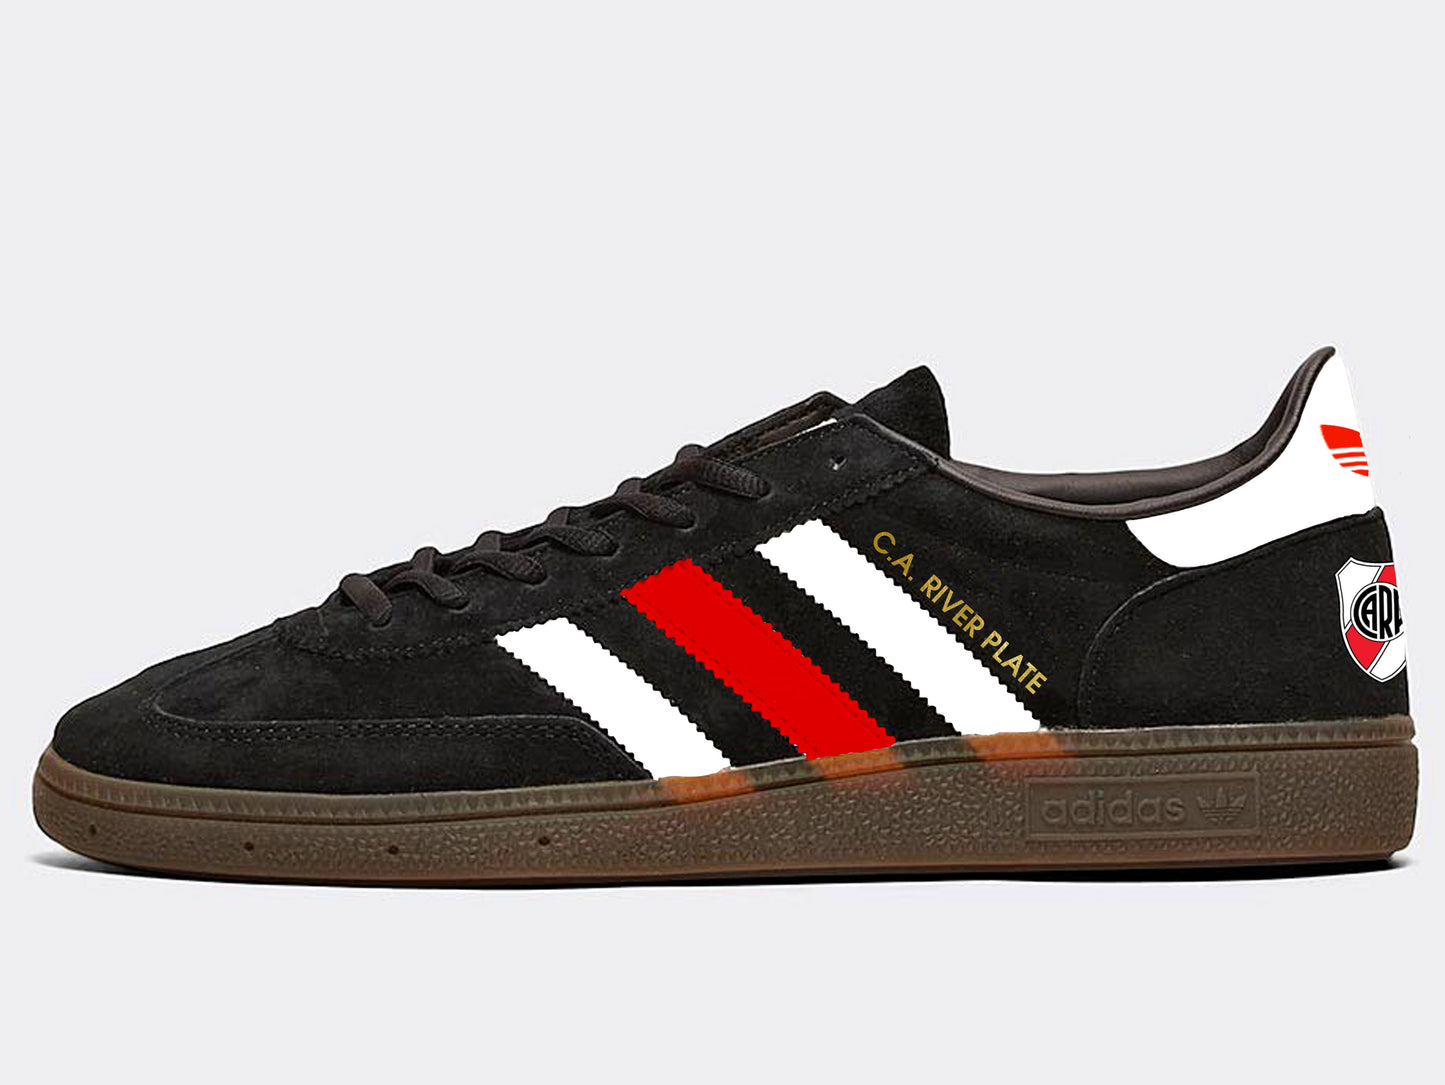 Limited edition Adidas River Plate black / red / white Spezial trainers / sneakers